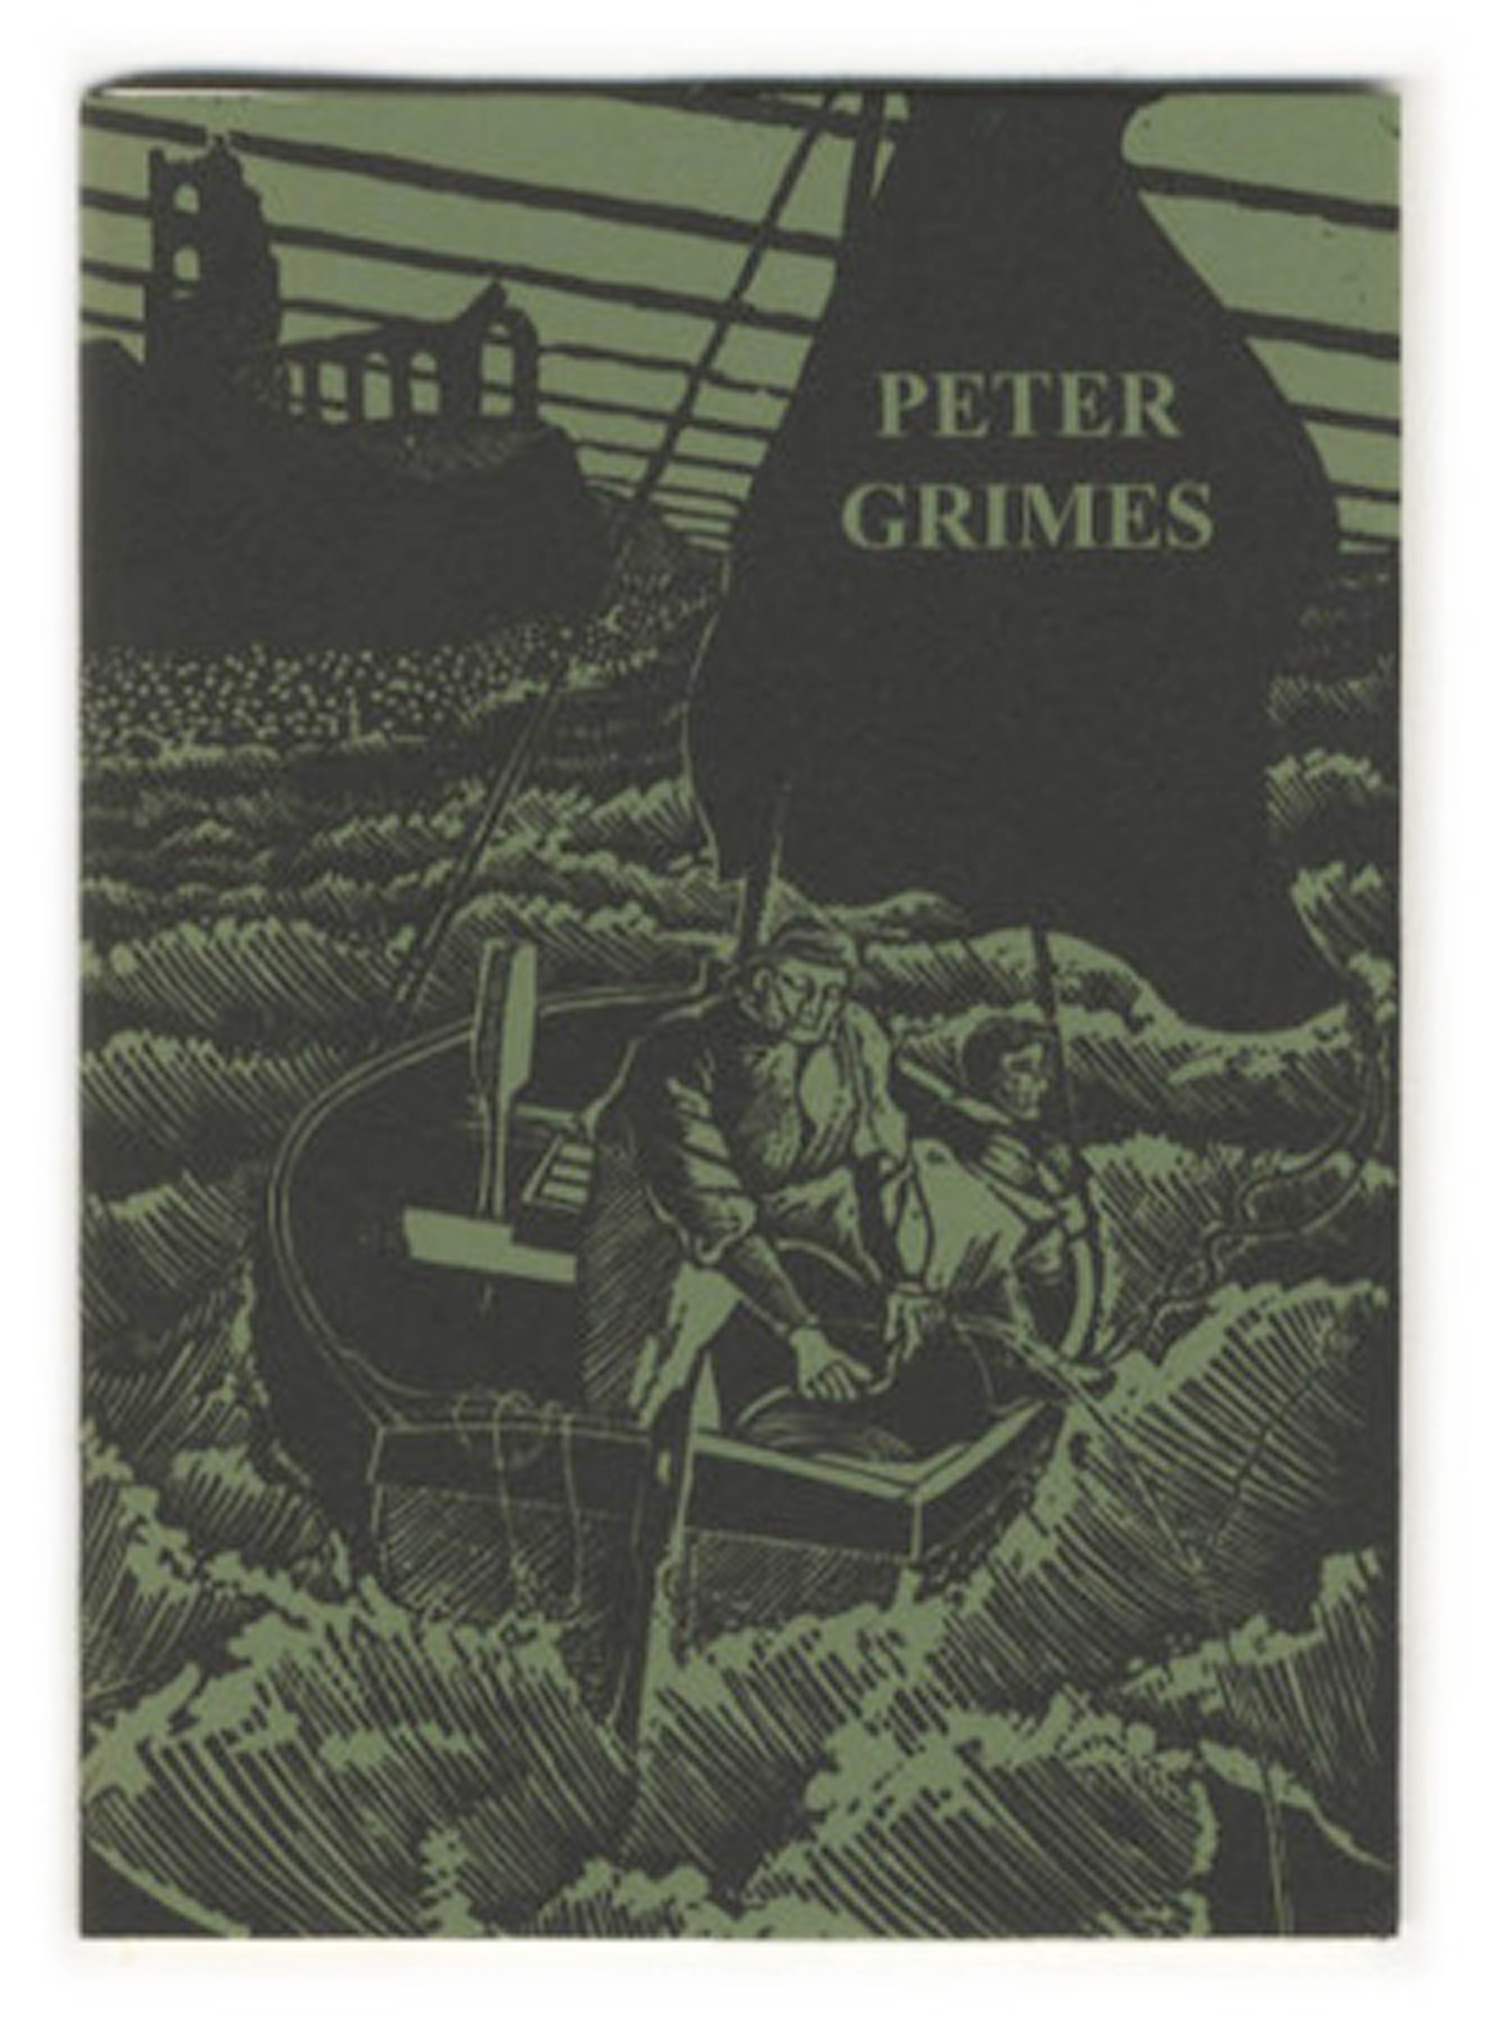 Peter Grimes by James Dodds